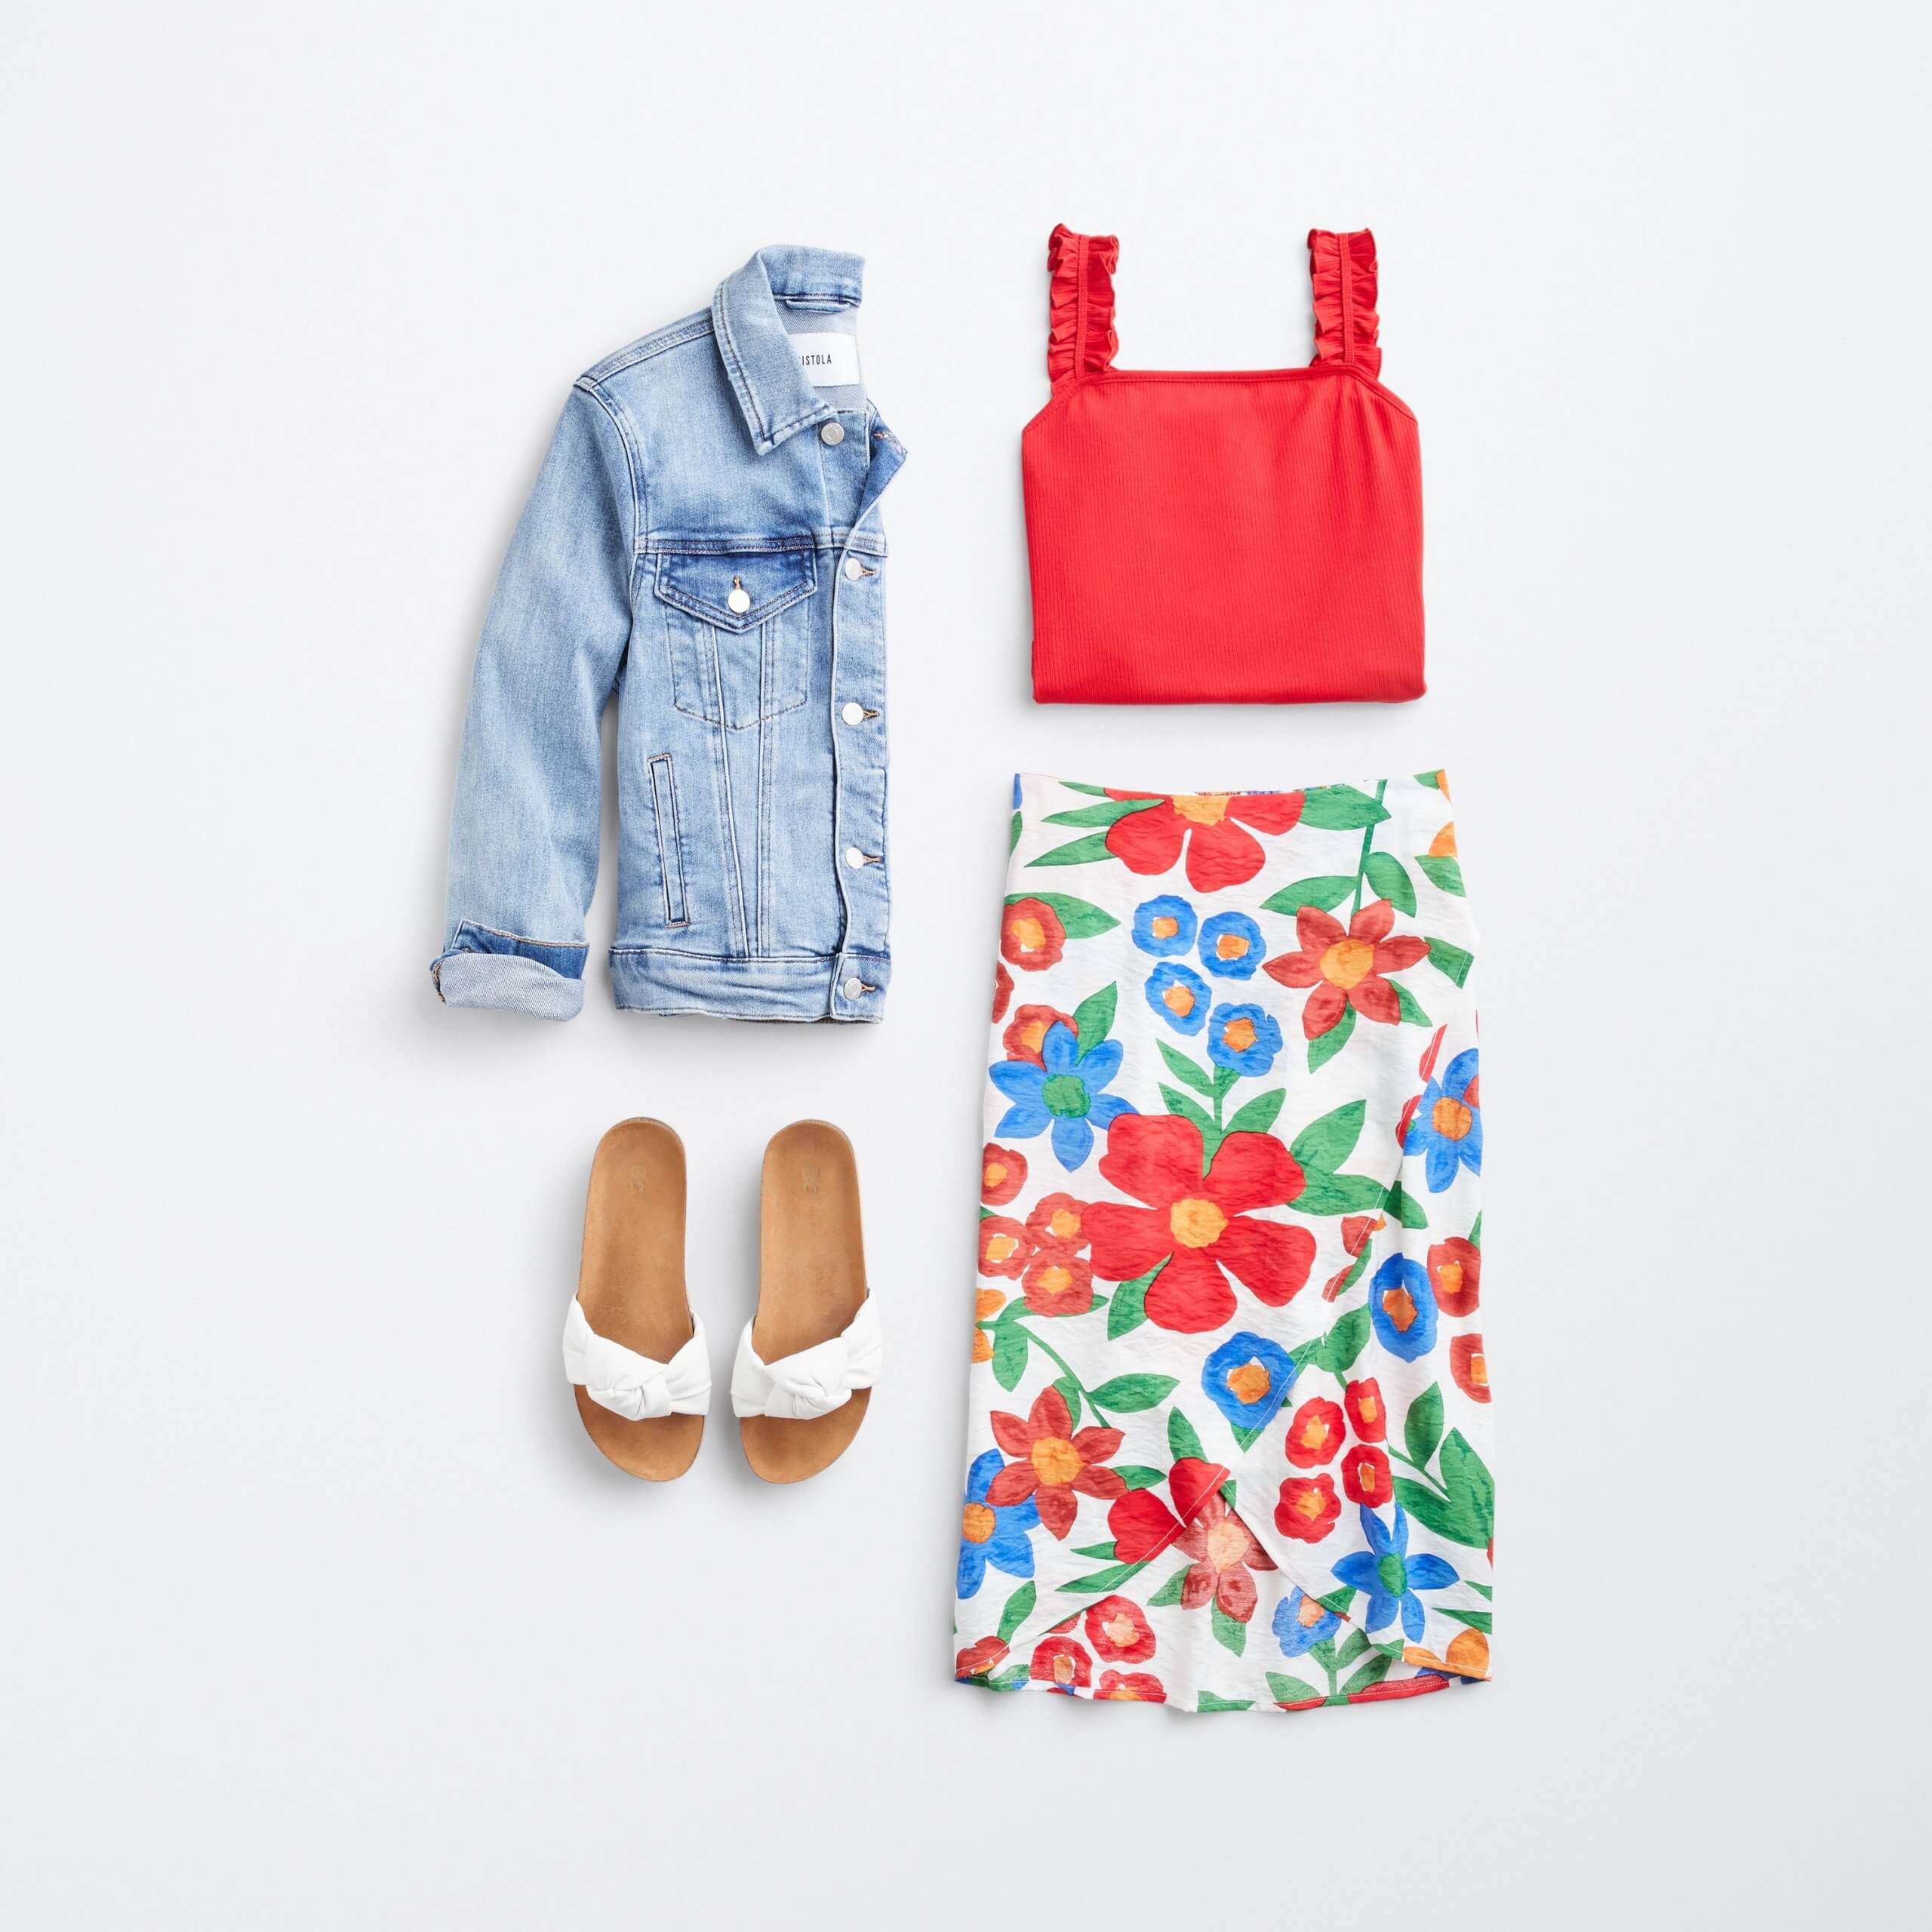 Stitch Fix women’s outfit laydown featuring colorful floral print skirt, pink cropped tank, white slide sandals and denim jacket..